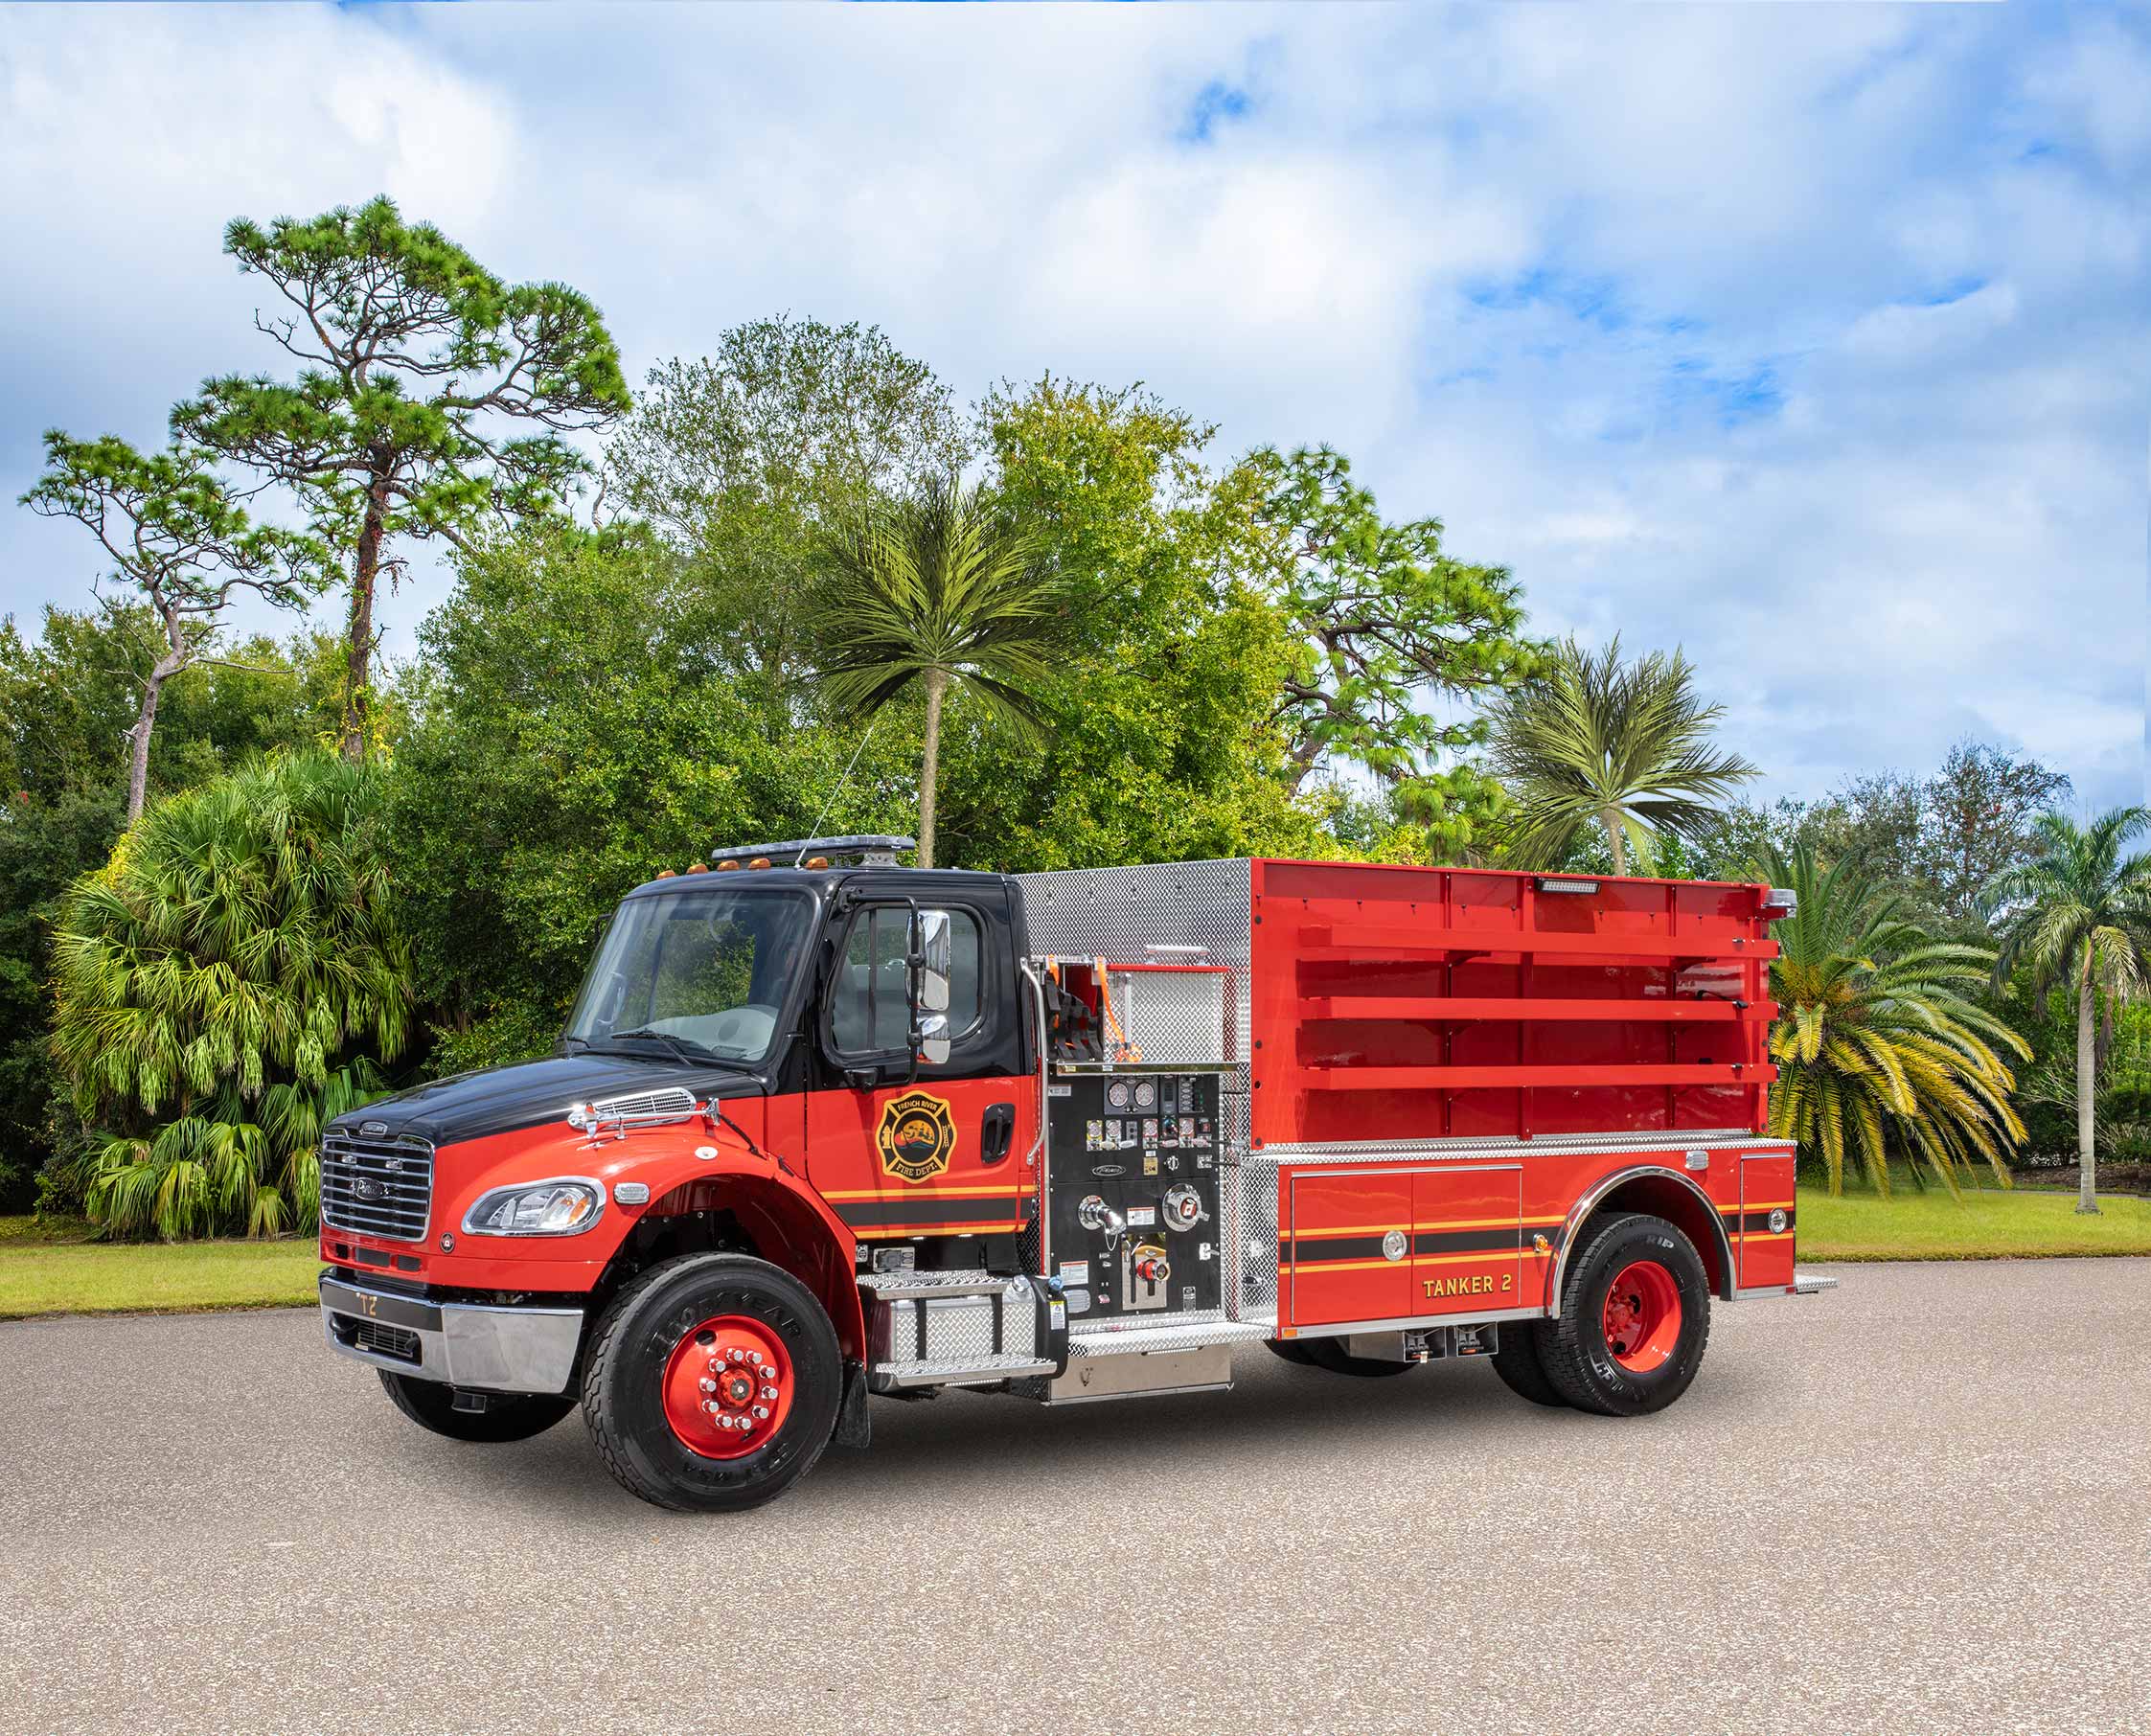 French River Fire Department - Tanker